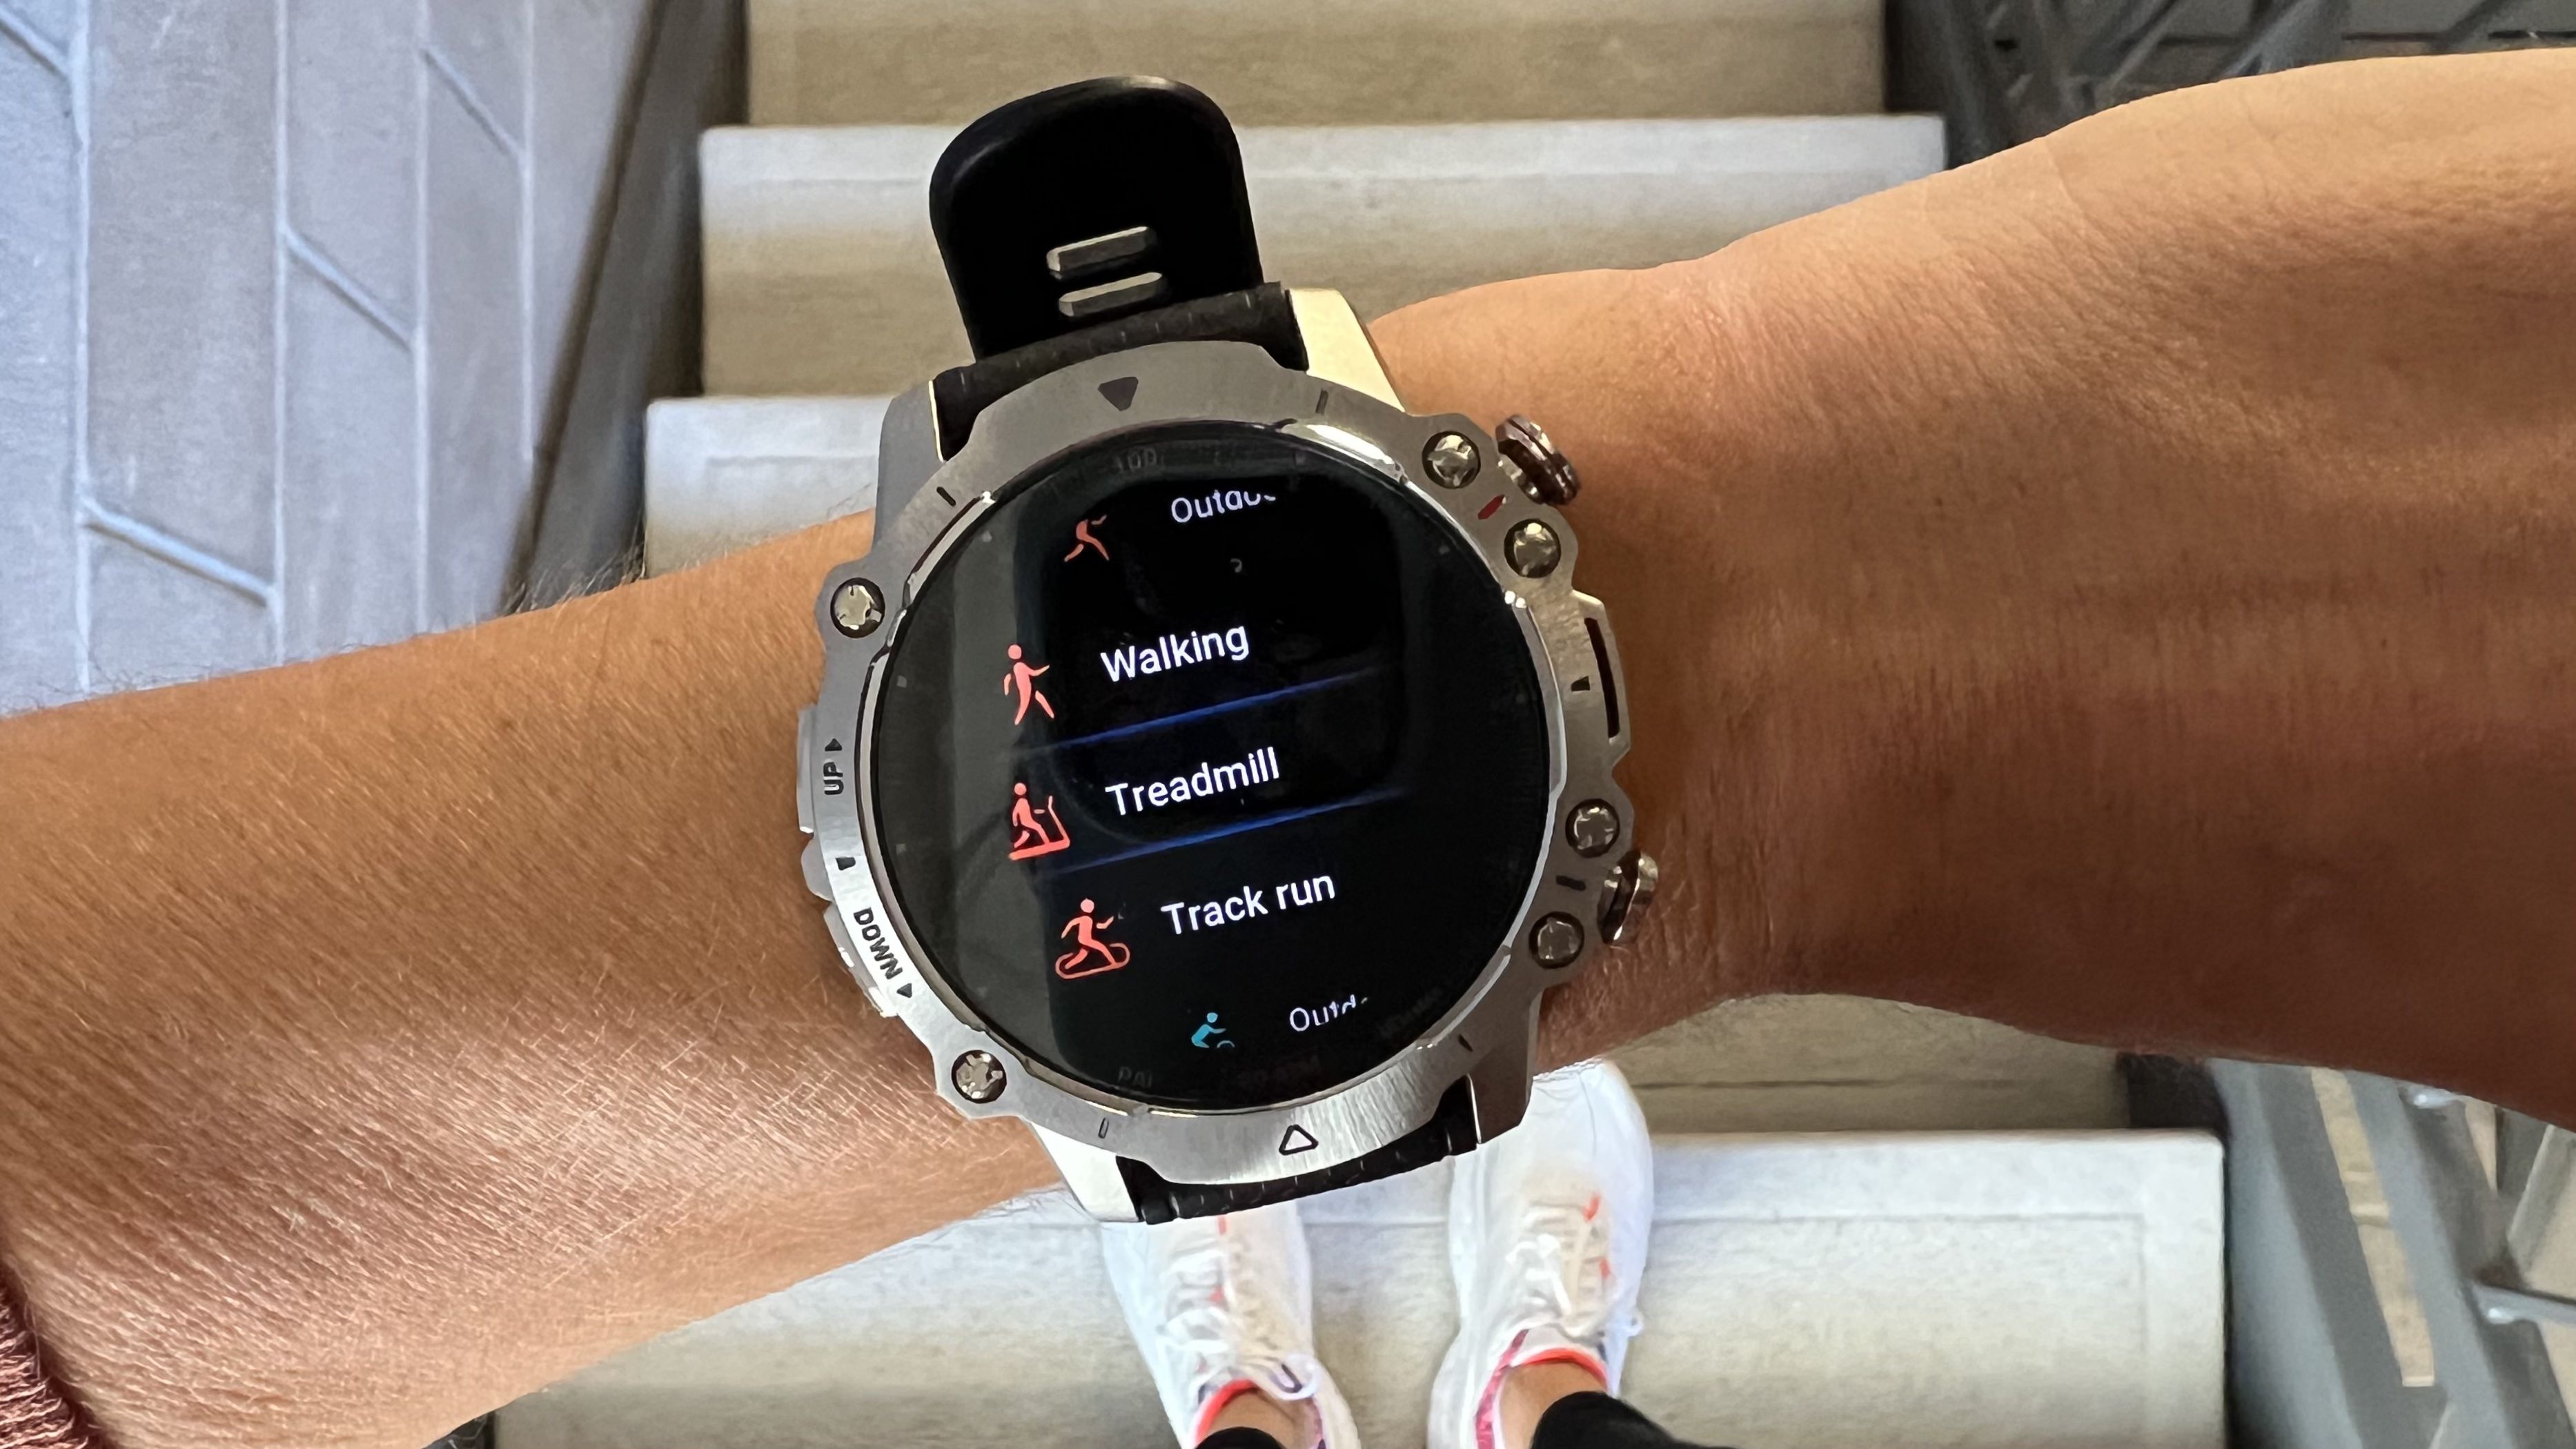 Amazfit Falcon With 150 Sports Modes, 14-Day Battery Life Launched in India